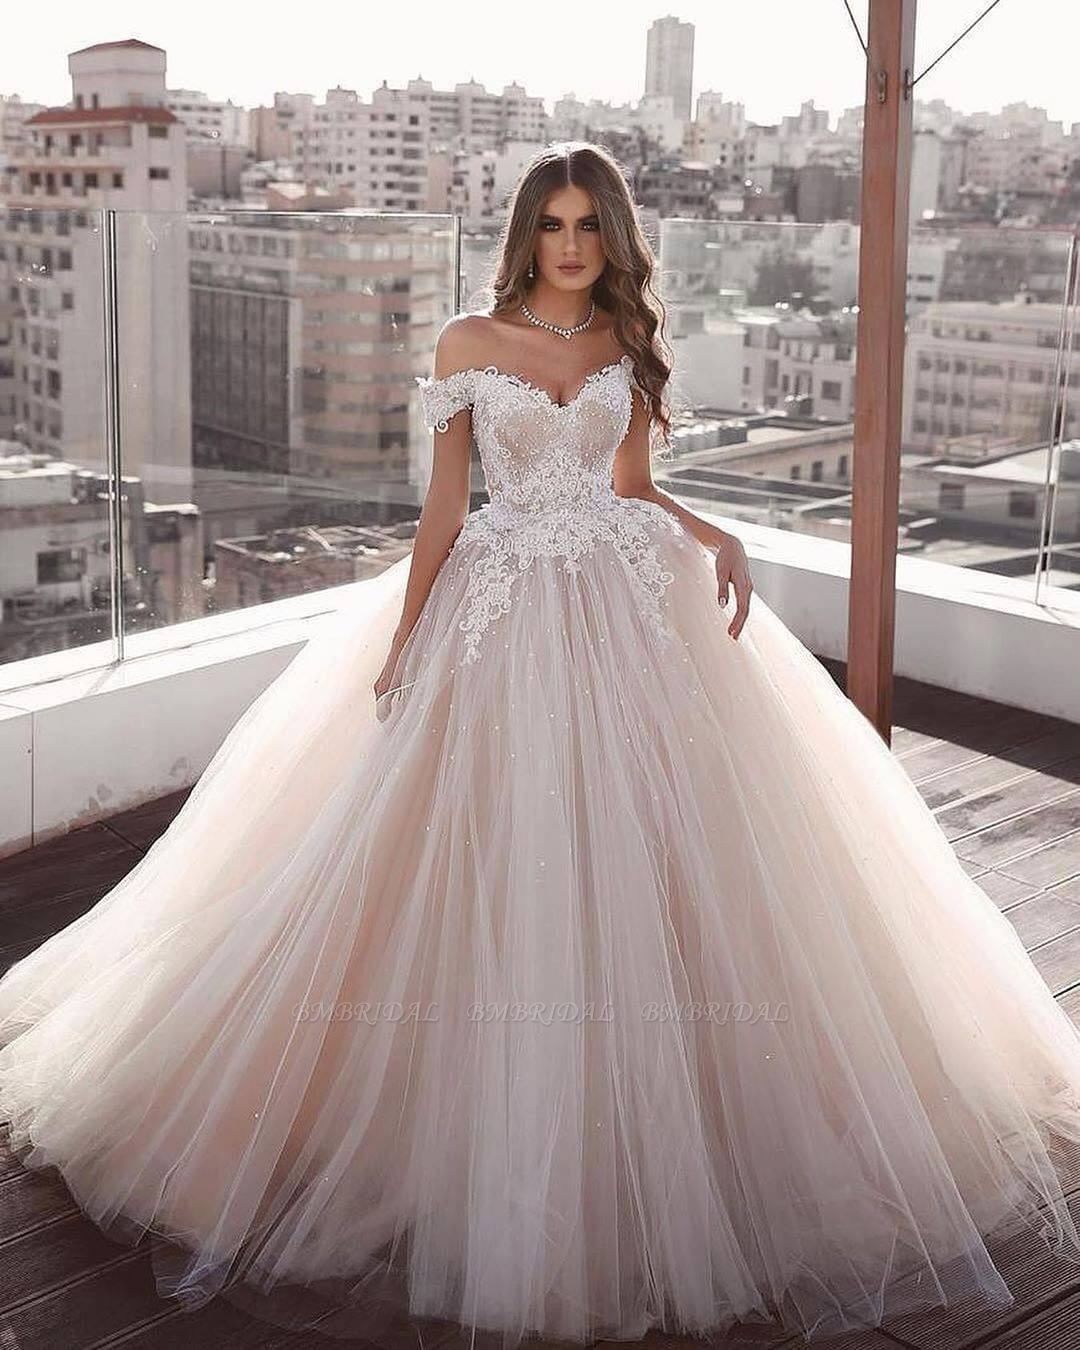 BMbridal Off-the-Shoulder Champagne Wedding Dress Ball Gown With Tulle Lace